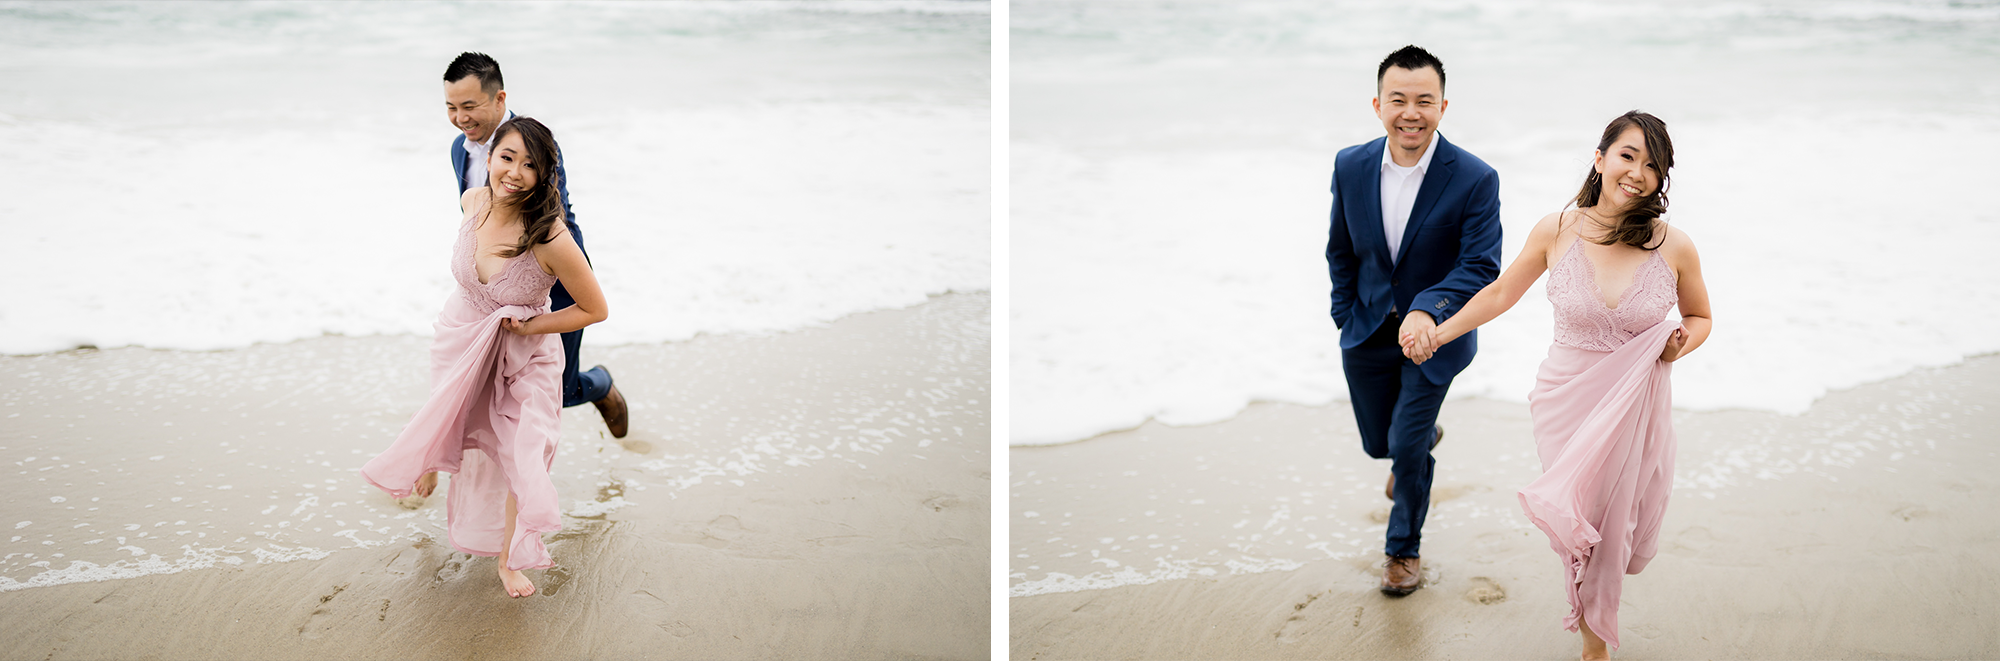 8-FH-Irvine-Jeffrey-Open-Space-Laguna-Victoria-Beach-Engagement-Session-Photos-Andrew-Kwak-Photography.png